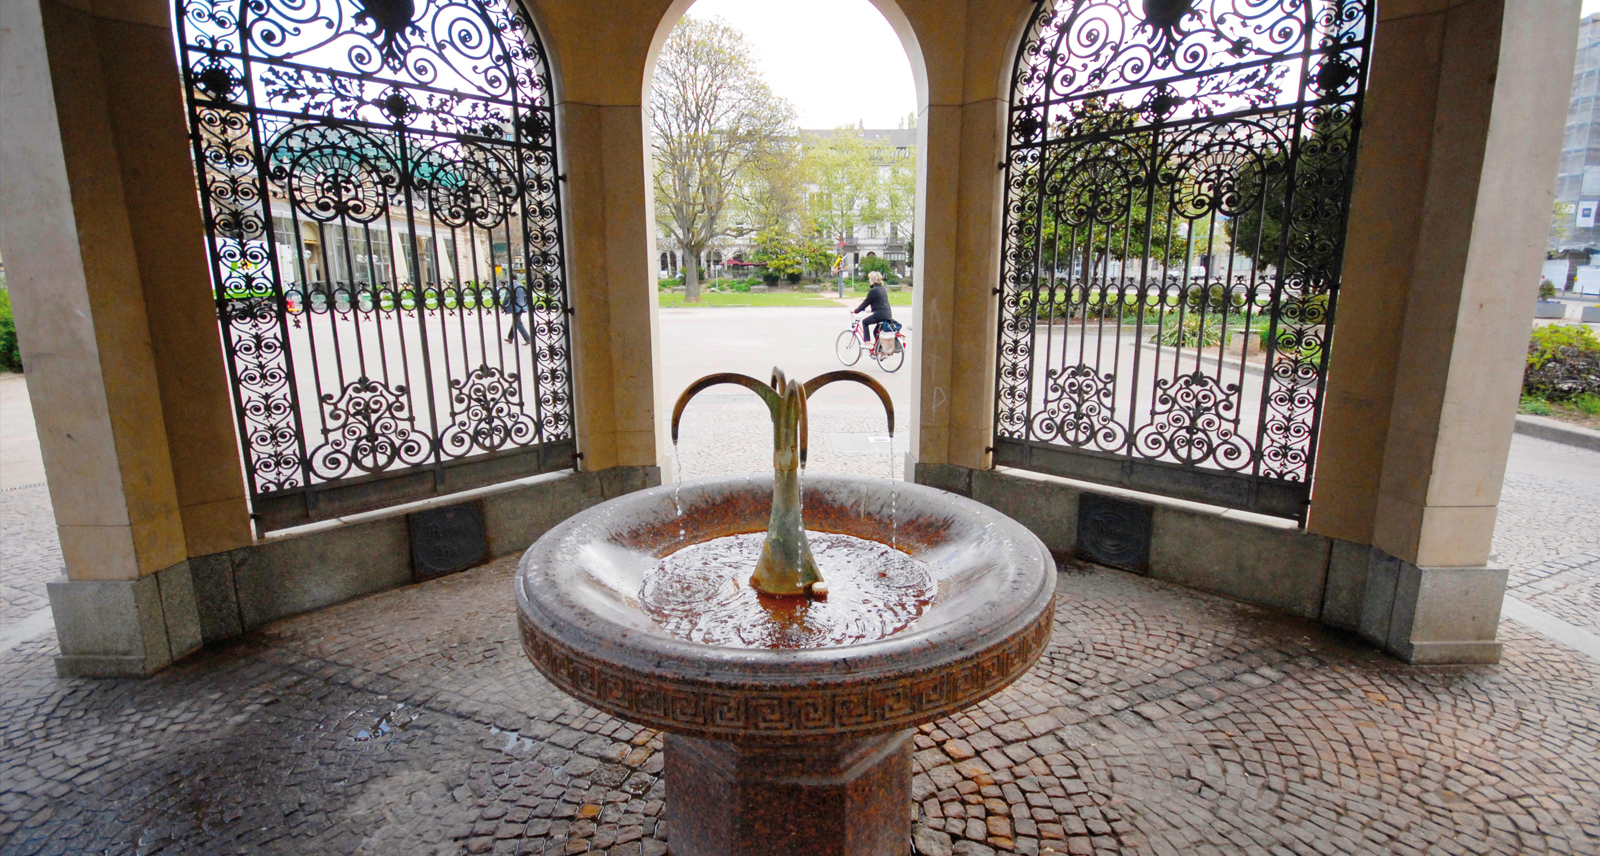 The Kochbrunnen fountain on Kranzplatz is not only Wiesbaden's most famous thermal spring, but also the symbol of the city